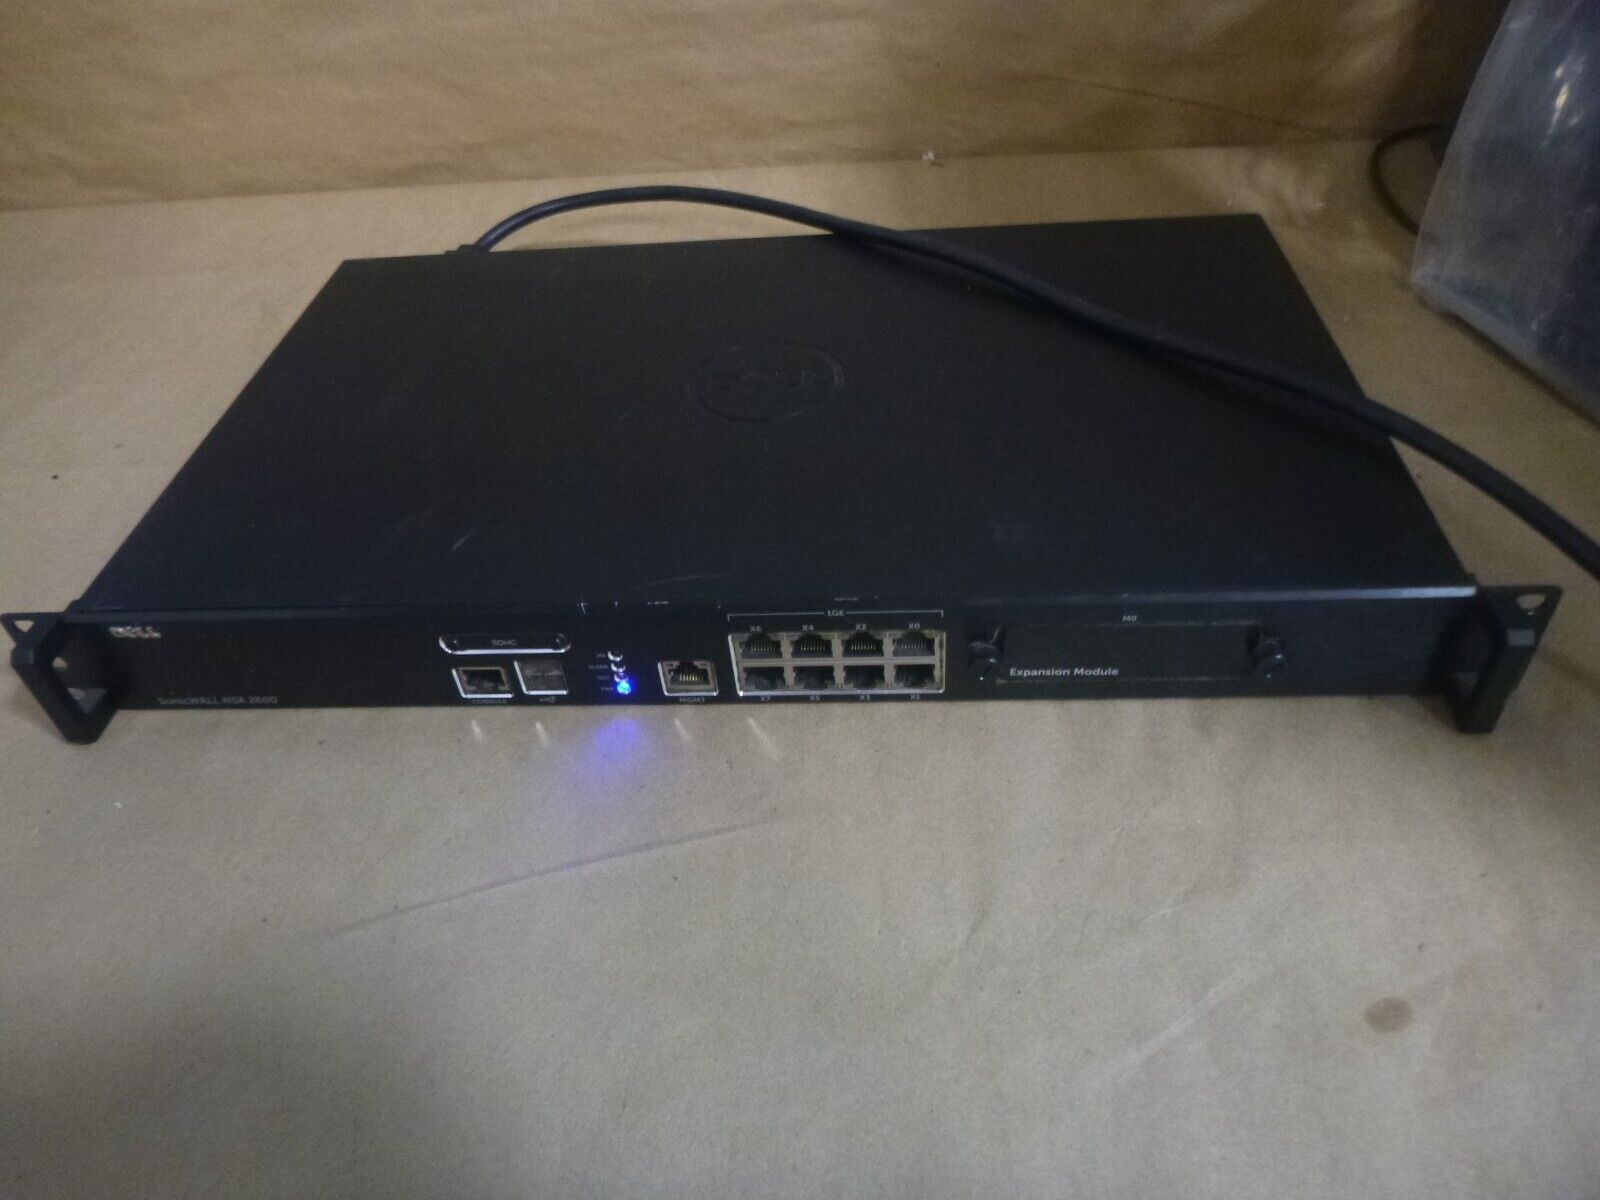 Dell SonicWALL NSA 2600 IRK29-0A9 8-Port Network Security Appliance Switch